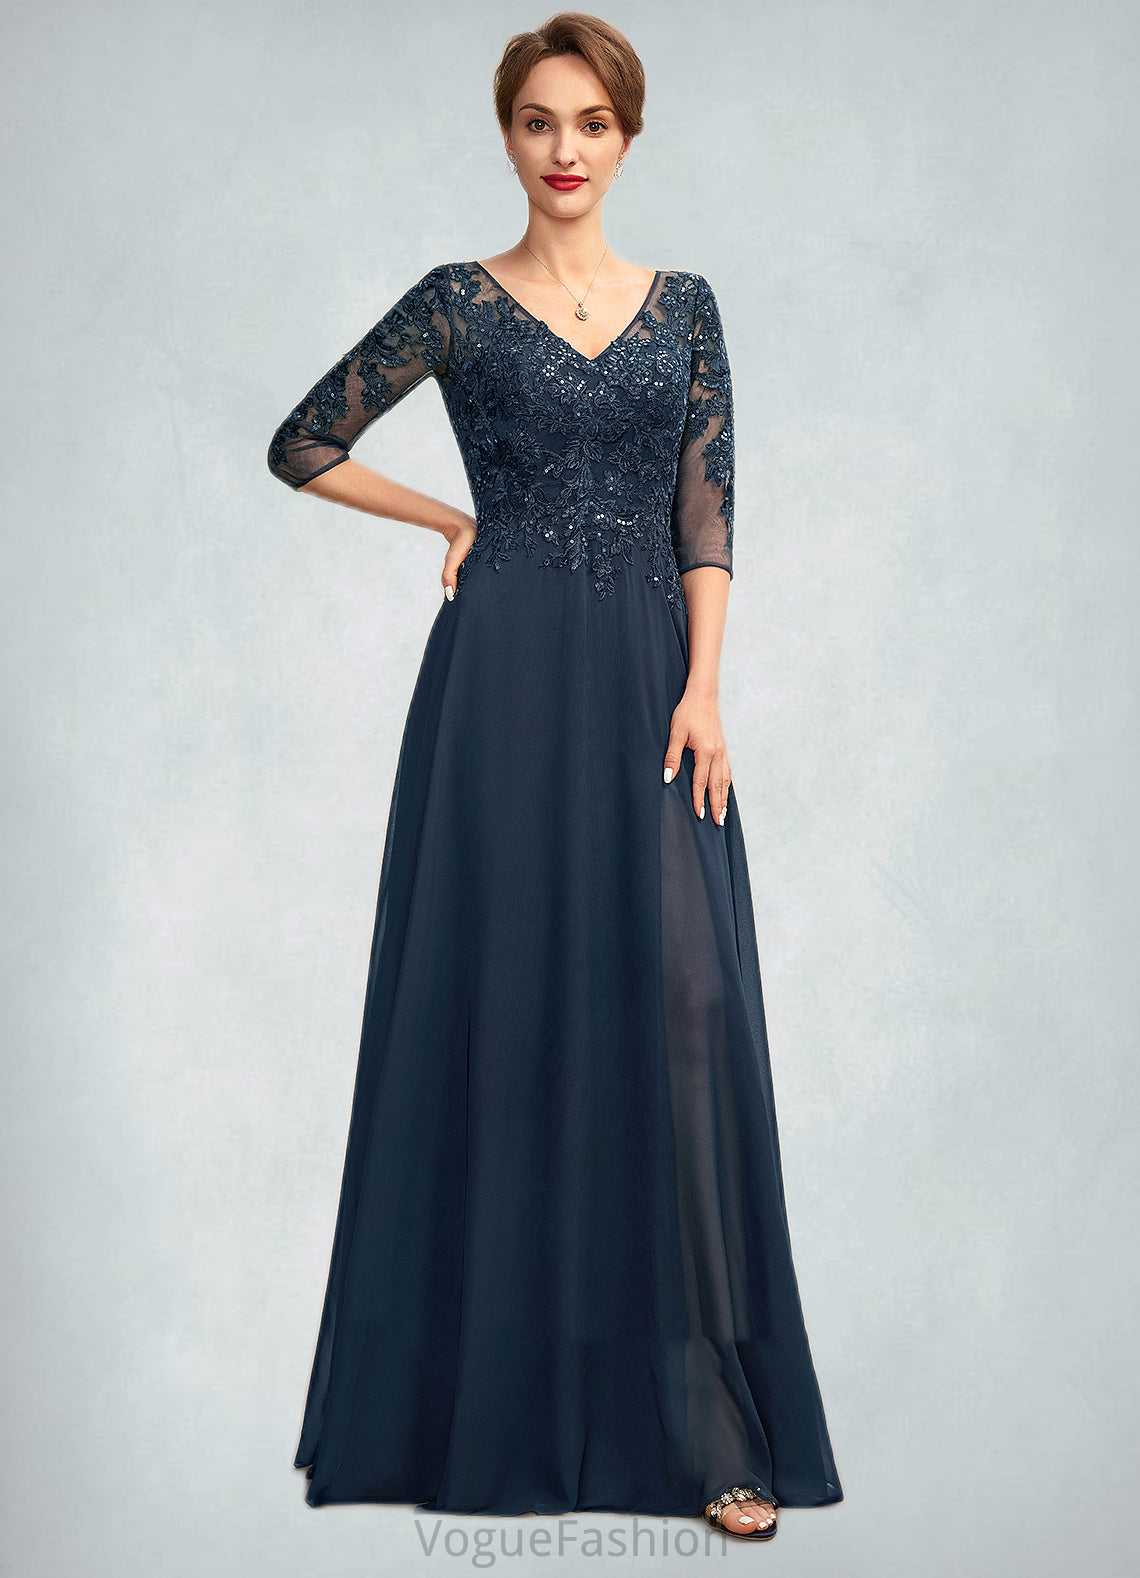 Aliya A-Line V-neck Floor-Length Chiffon Lace Mother of the Bride Dress With Sequins Split Front DK126P0015014